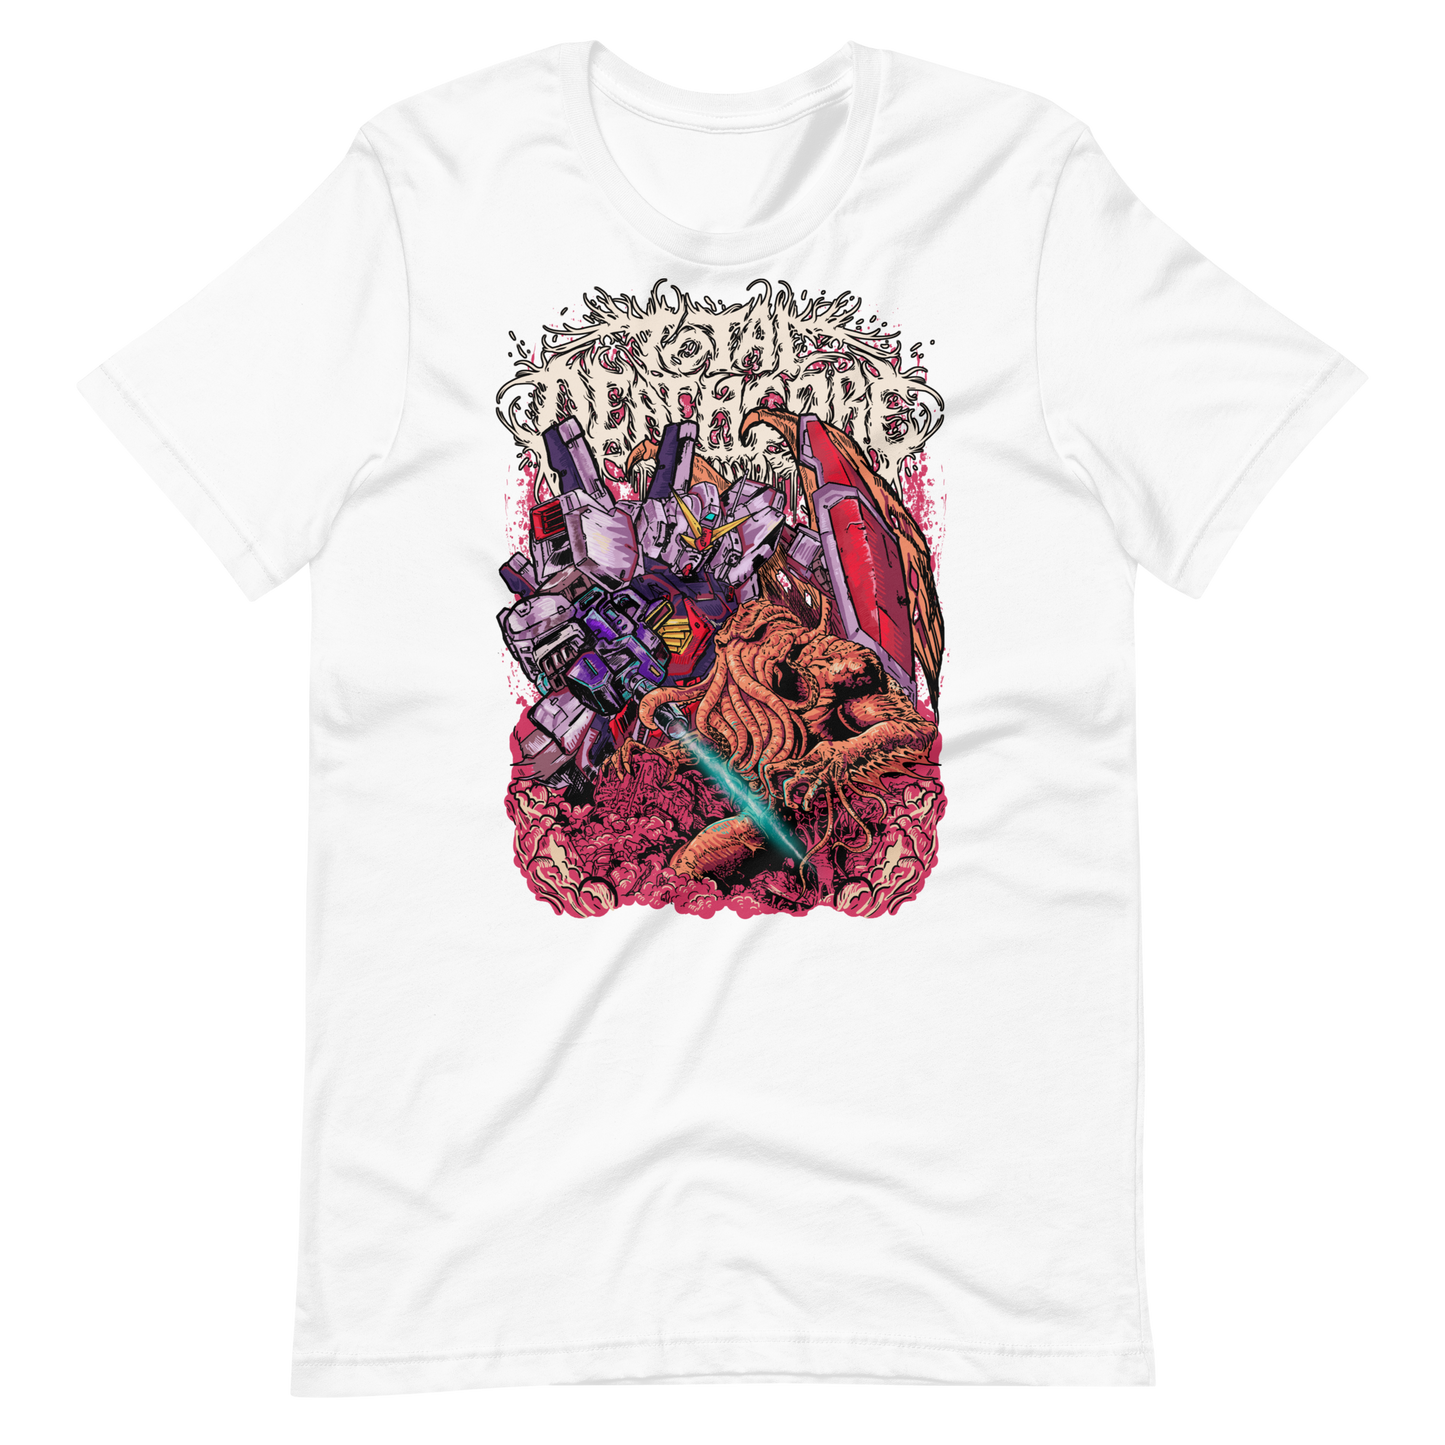 Total Deathcore "Final Fight" - Unisex t-shirt